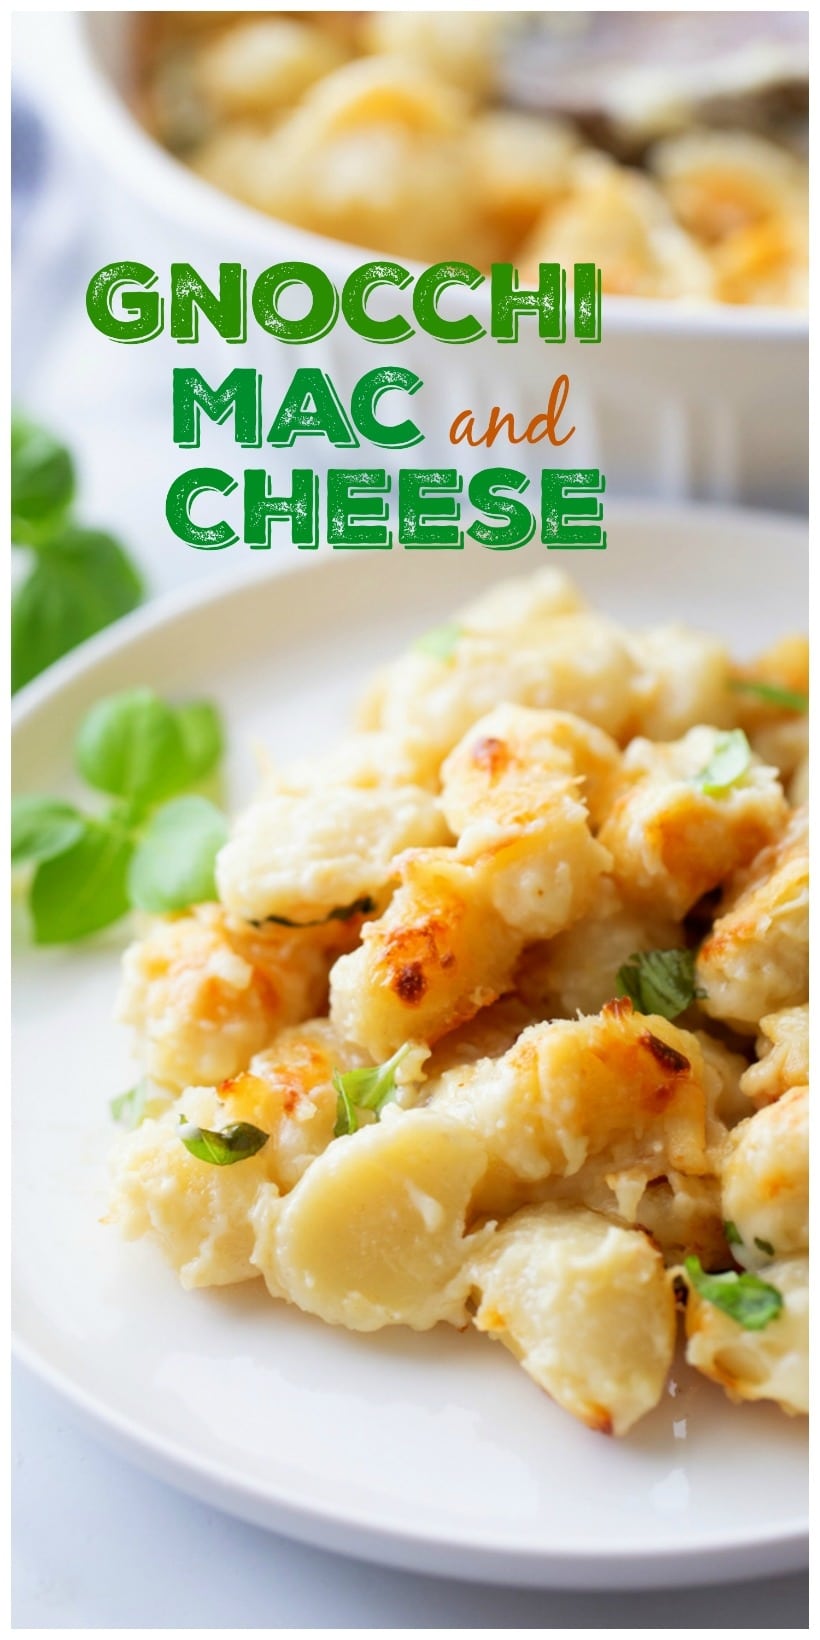 The Best Gnocchi Mac and Cheese - a mouth-wateringly complex blend of flavors. You are going to flip over the savory, richly-layered gnocchi cheese sauce in every bite.  via @cmpollak1